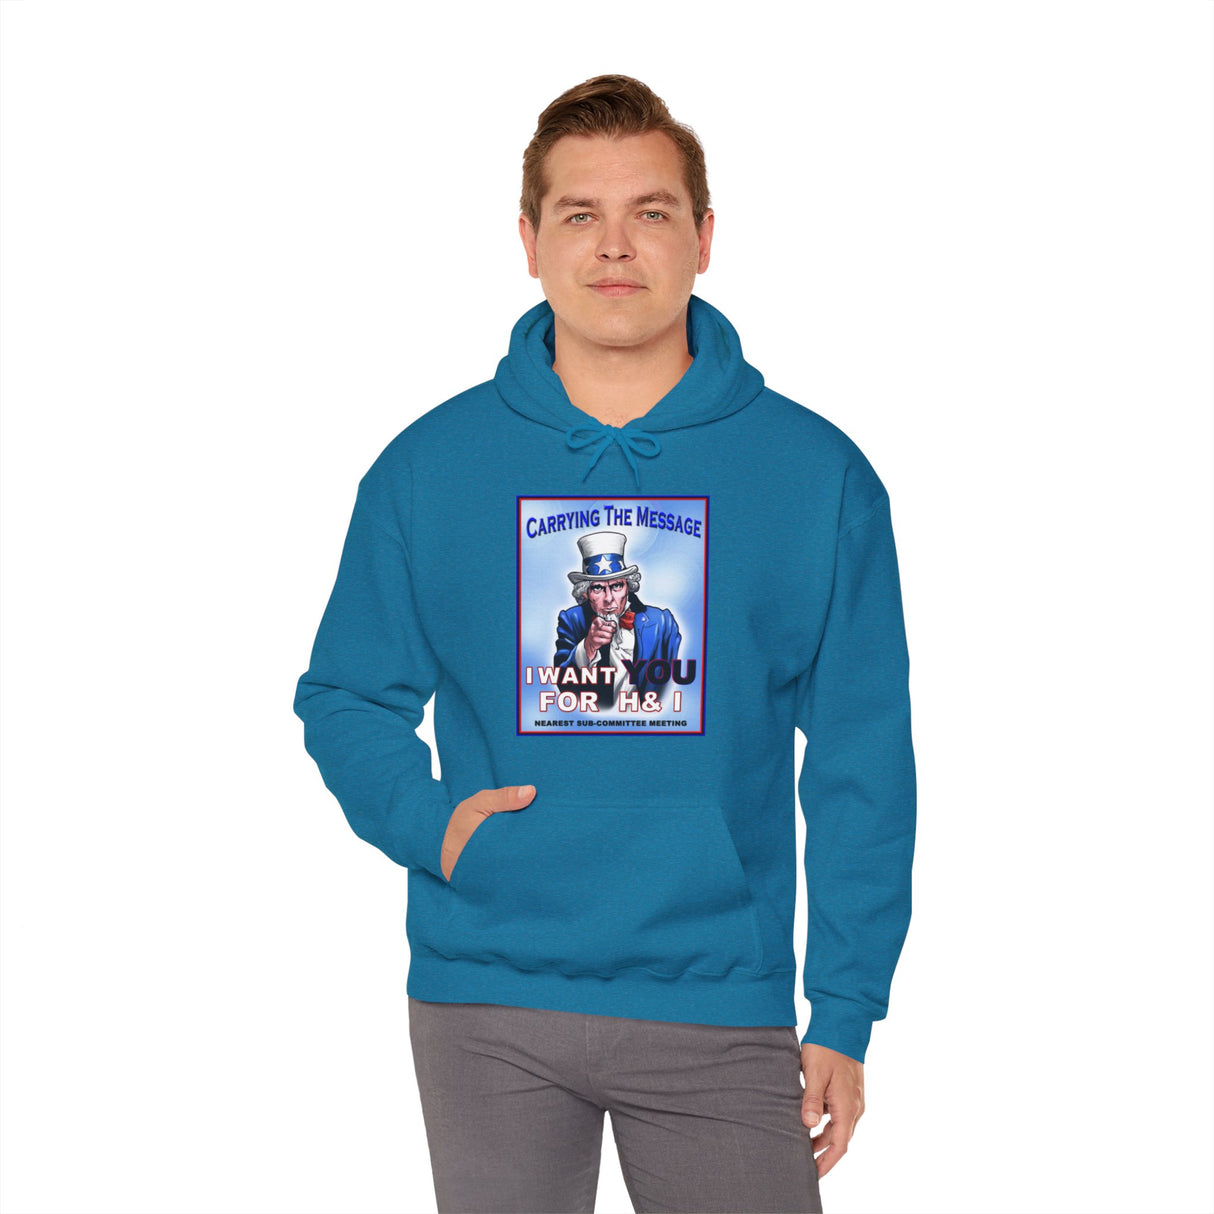 H&I I Want You dtg Hoodie